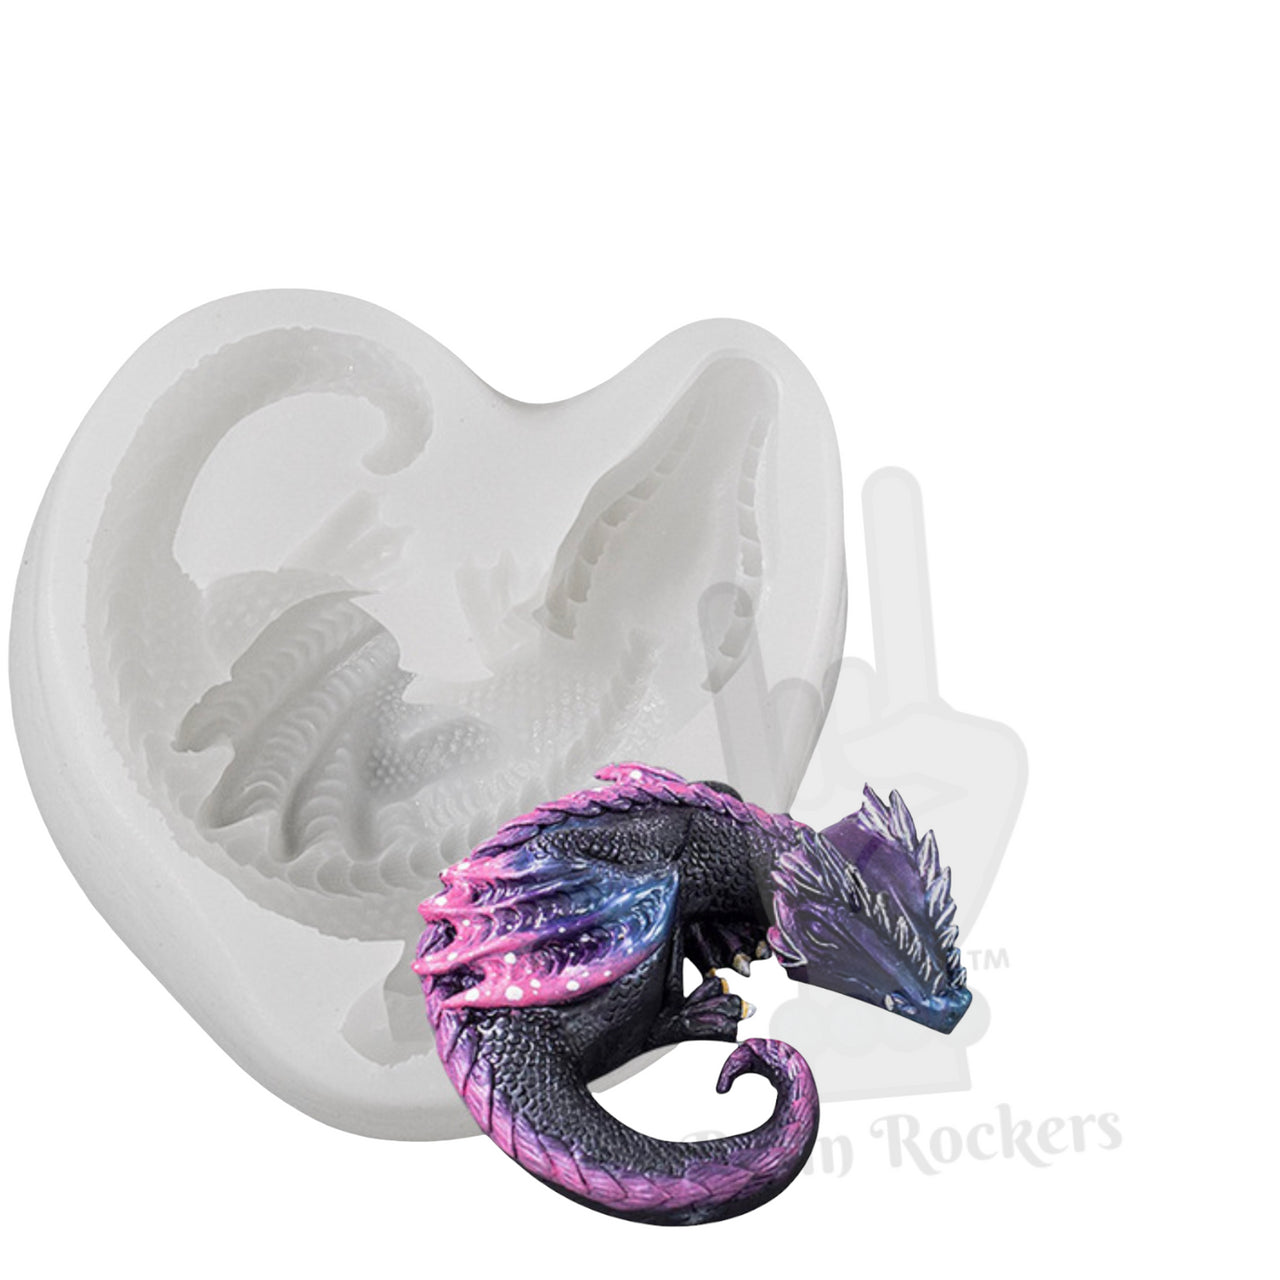 3D Fire Dragon Silicone Mold for Epoxy Resin Art